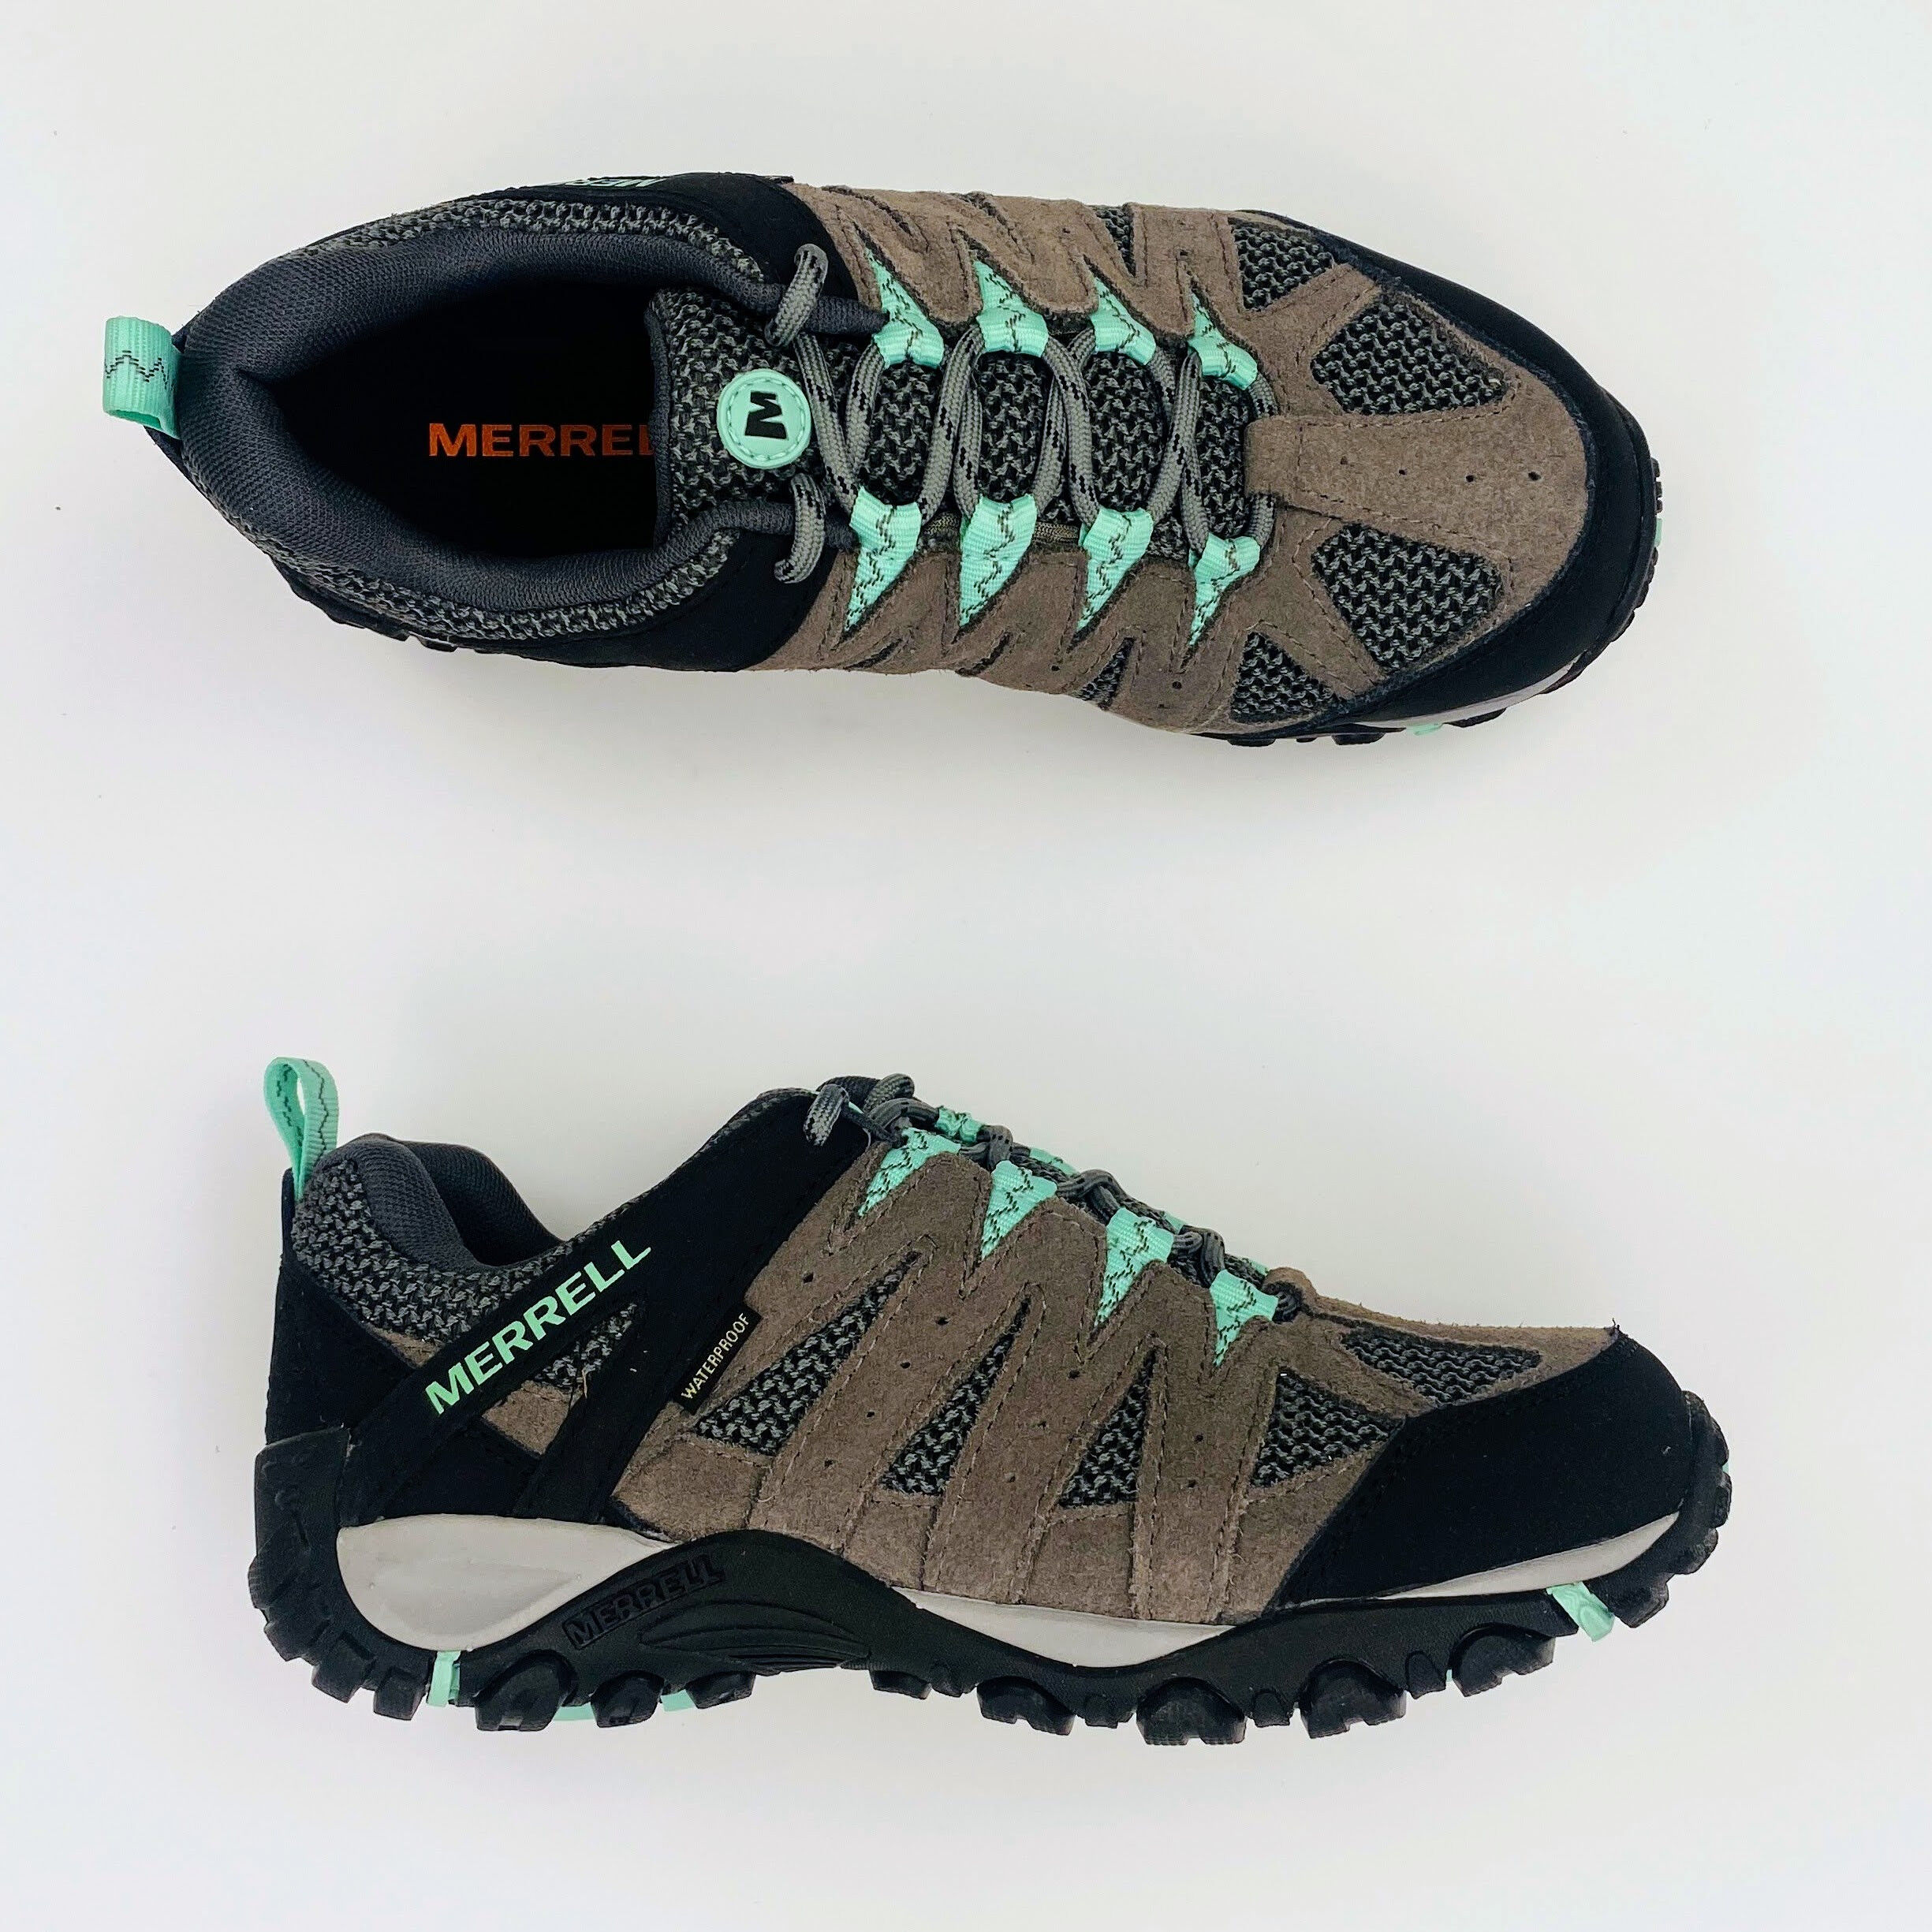 Merrell Accentor 2 Vent Wp - Seconde main Chaussures femme - Gris - 38 | Hardloop